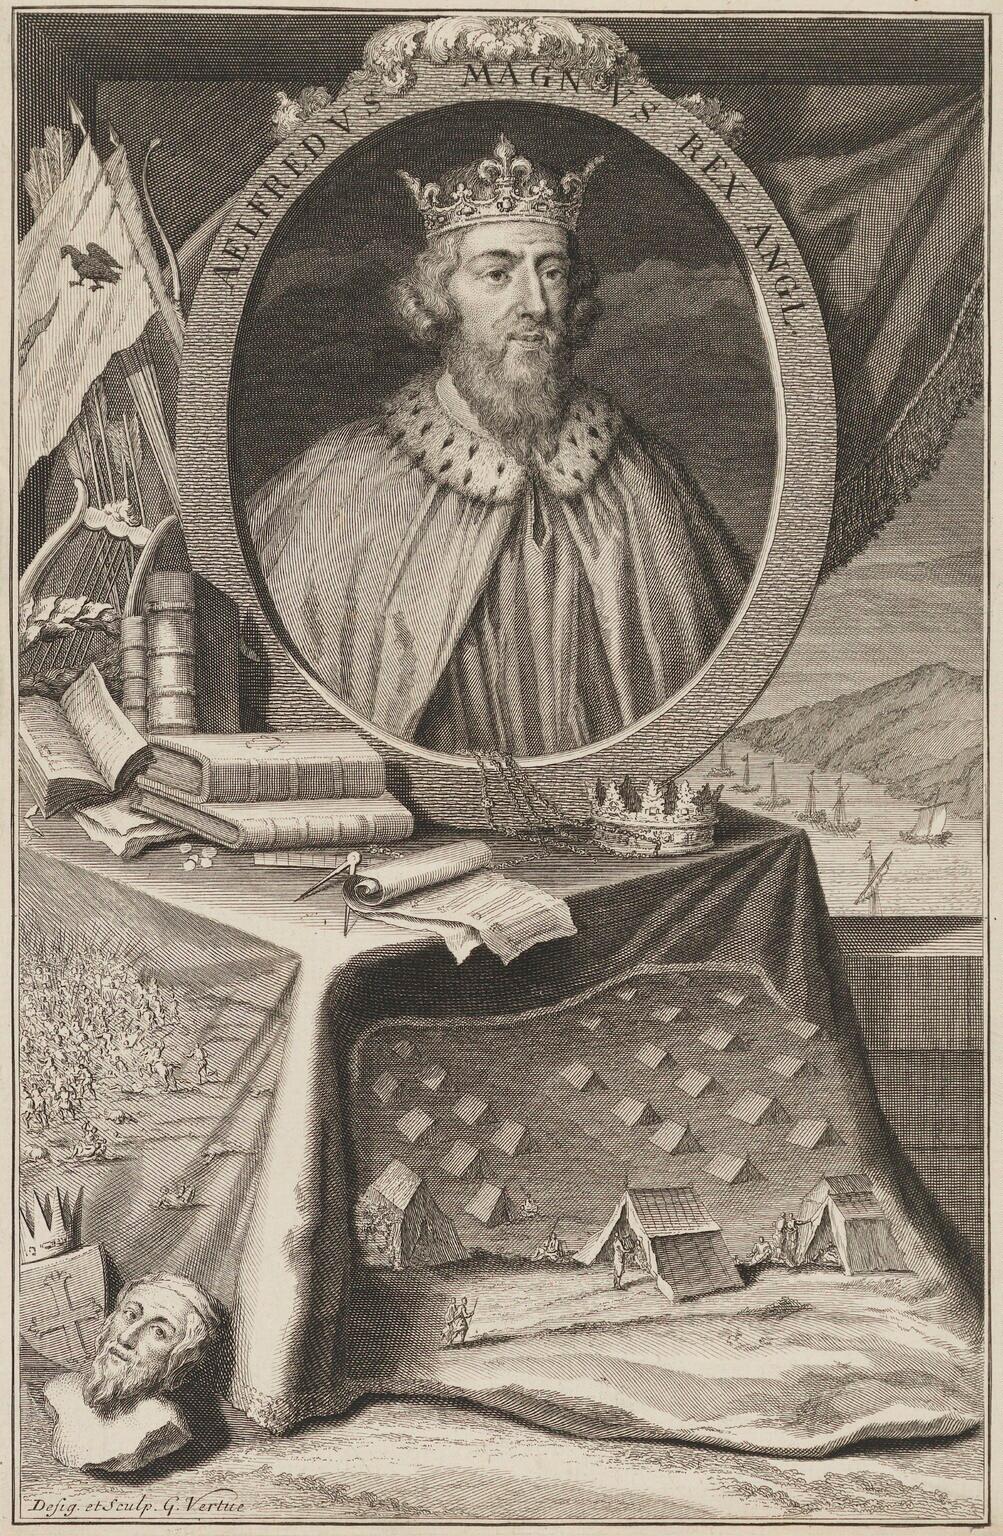 An engraving of King Alfred the Great in "Rapin's History of England," 1732, by George Vertue. National Portrait Gallery, London. (Public Domain)  A portrait of Alfred (Latin: Aelfredus Magnus Rex Angl) is flanked by books and documents symbolizing his literary and legislative works. To the side and below are scenes representing Alfred’s formation of the Royal Navy, his sojourn to the enemy camp in disguise, and his defeat of the Danes. Also depicted are his crown, weapons, and a captured Danish raven banner.